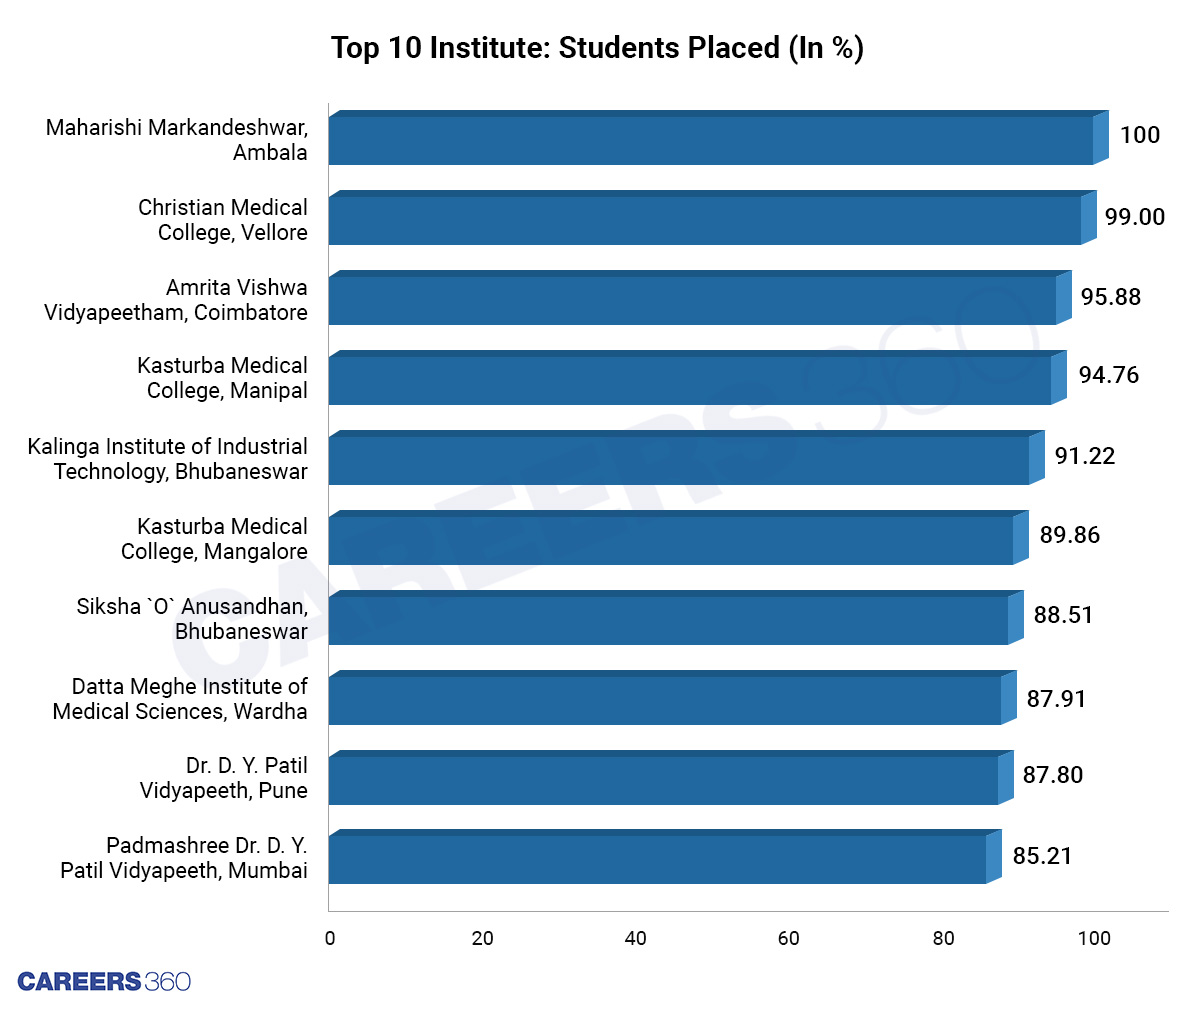 Top-10-Institutes-In-Terms-of-Placements